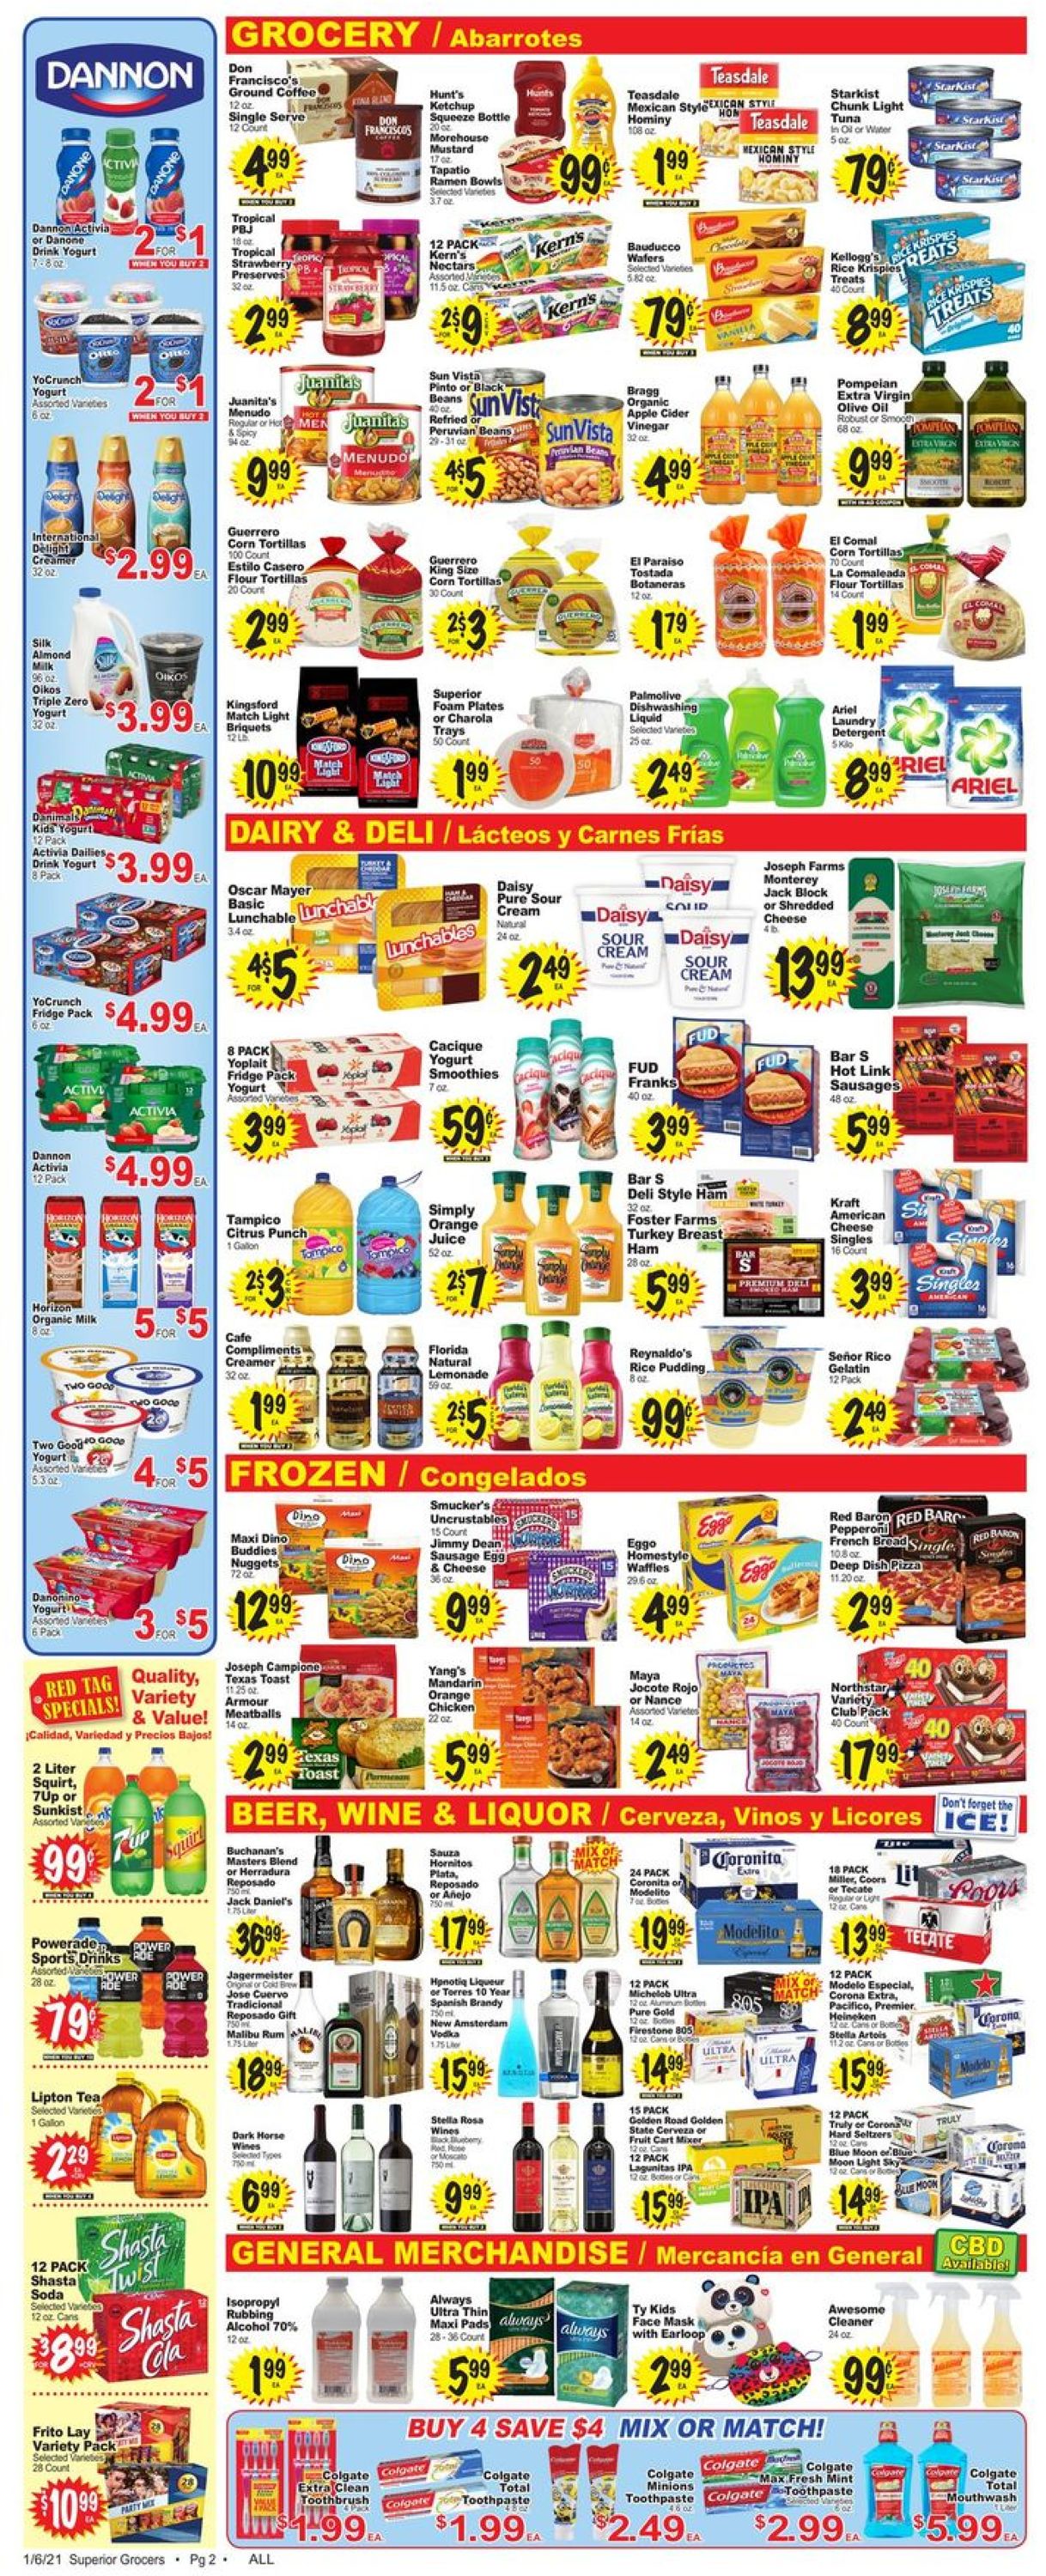 Catalogue Superior Grocers from 01/06/2021